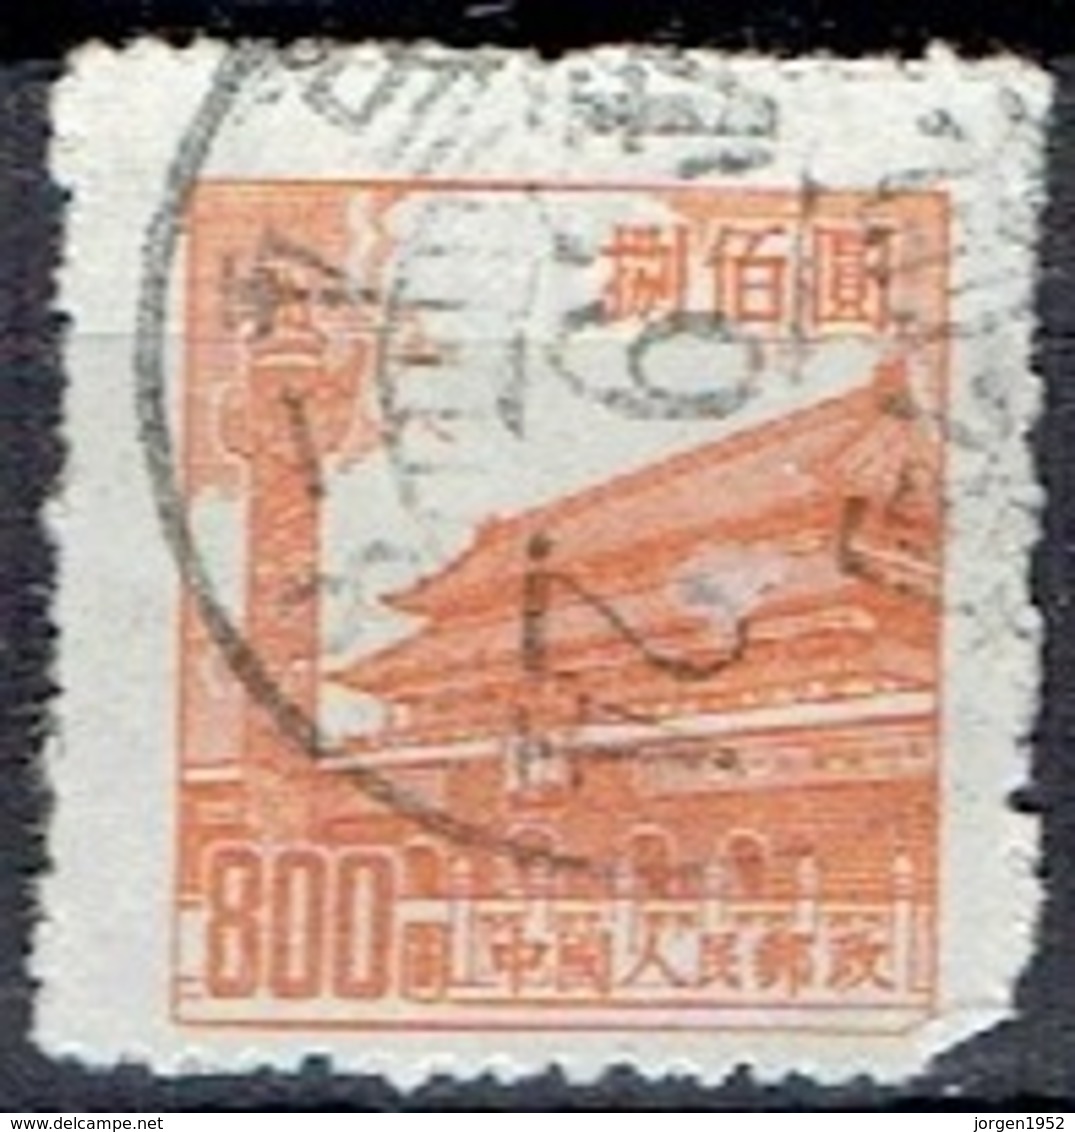 CHINA #  FROM 1954  STAMPWORLD 236 - Used Stamps